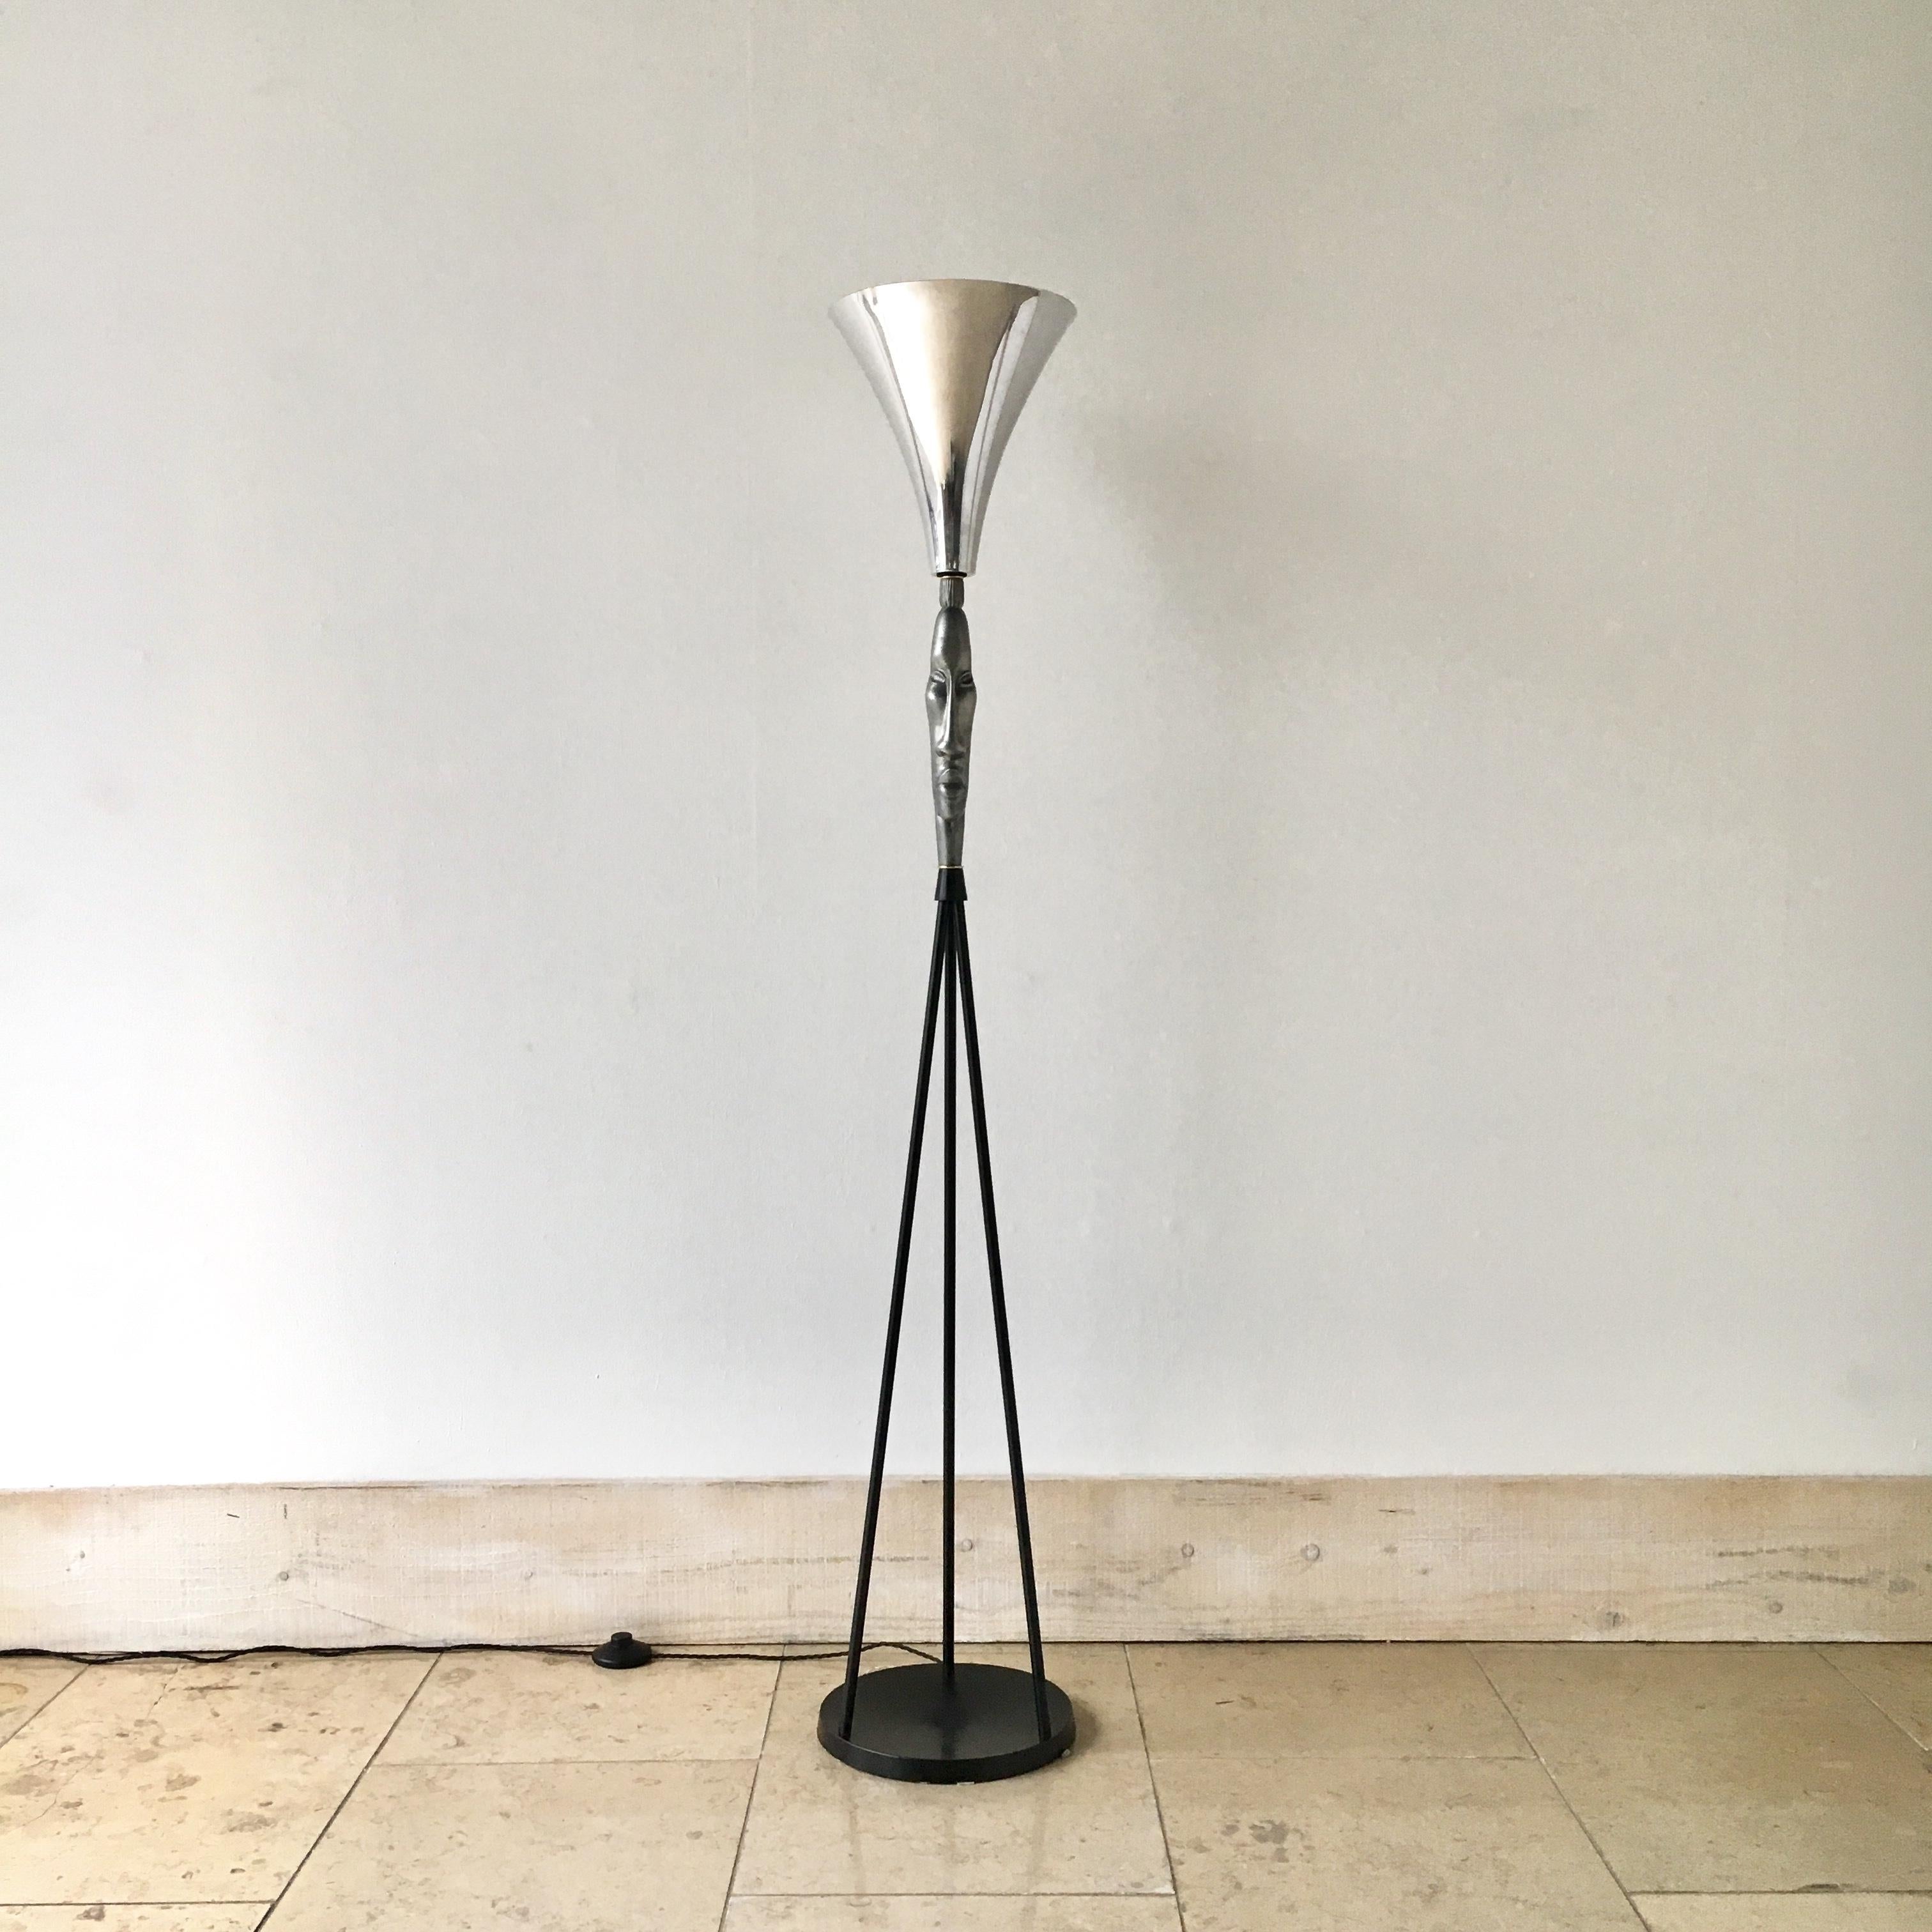 Sculptural cast aluminium uplighter floor lamp with Tiki face set on a blackened steel rod tripod base with polished aluminium shade, 1940s.

Refurbished and rewired to UK standards.